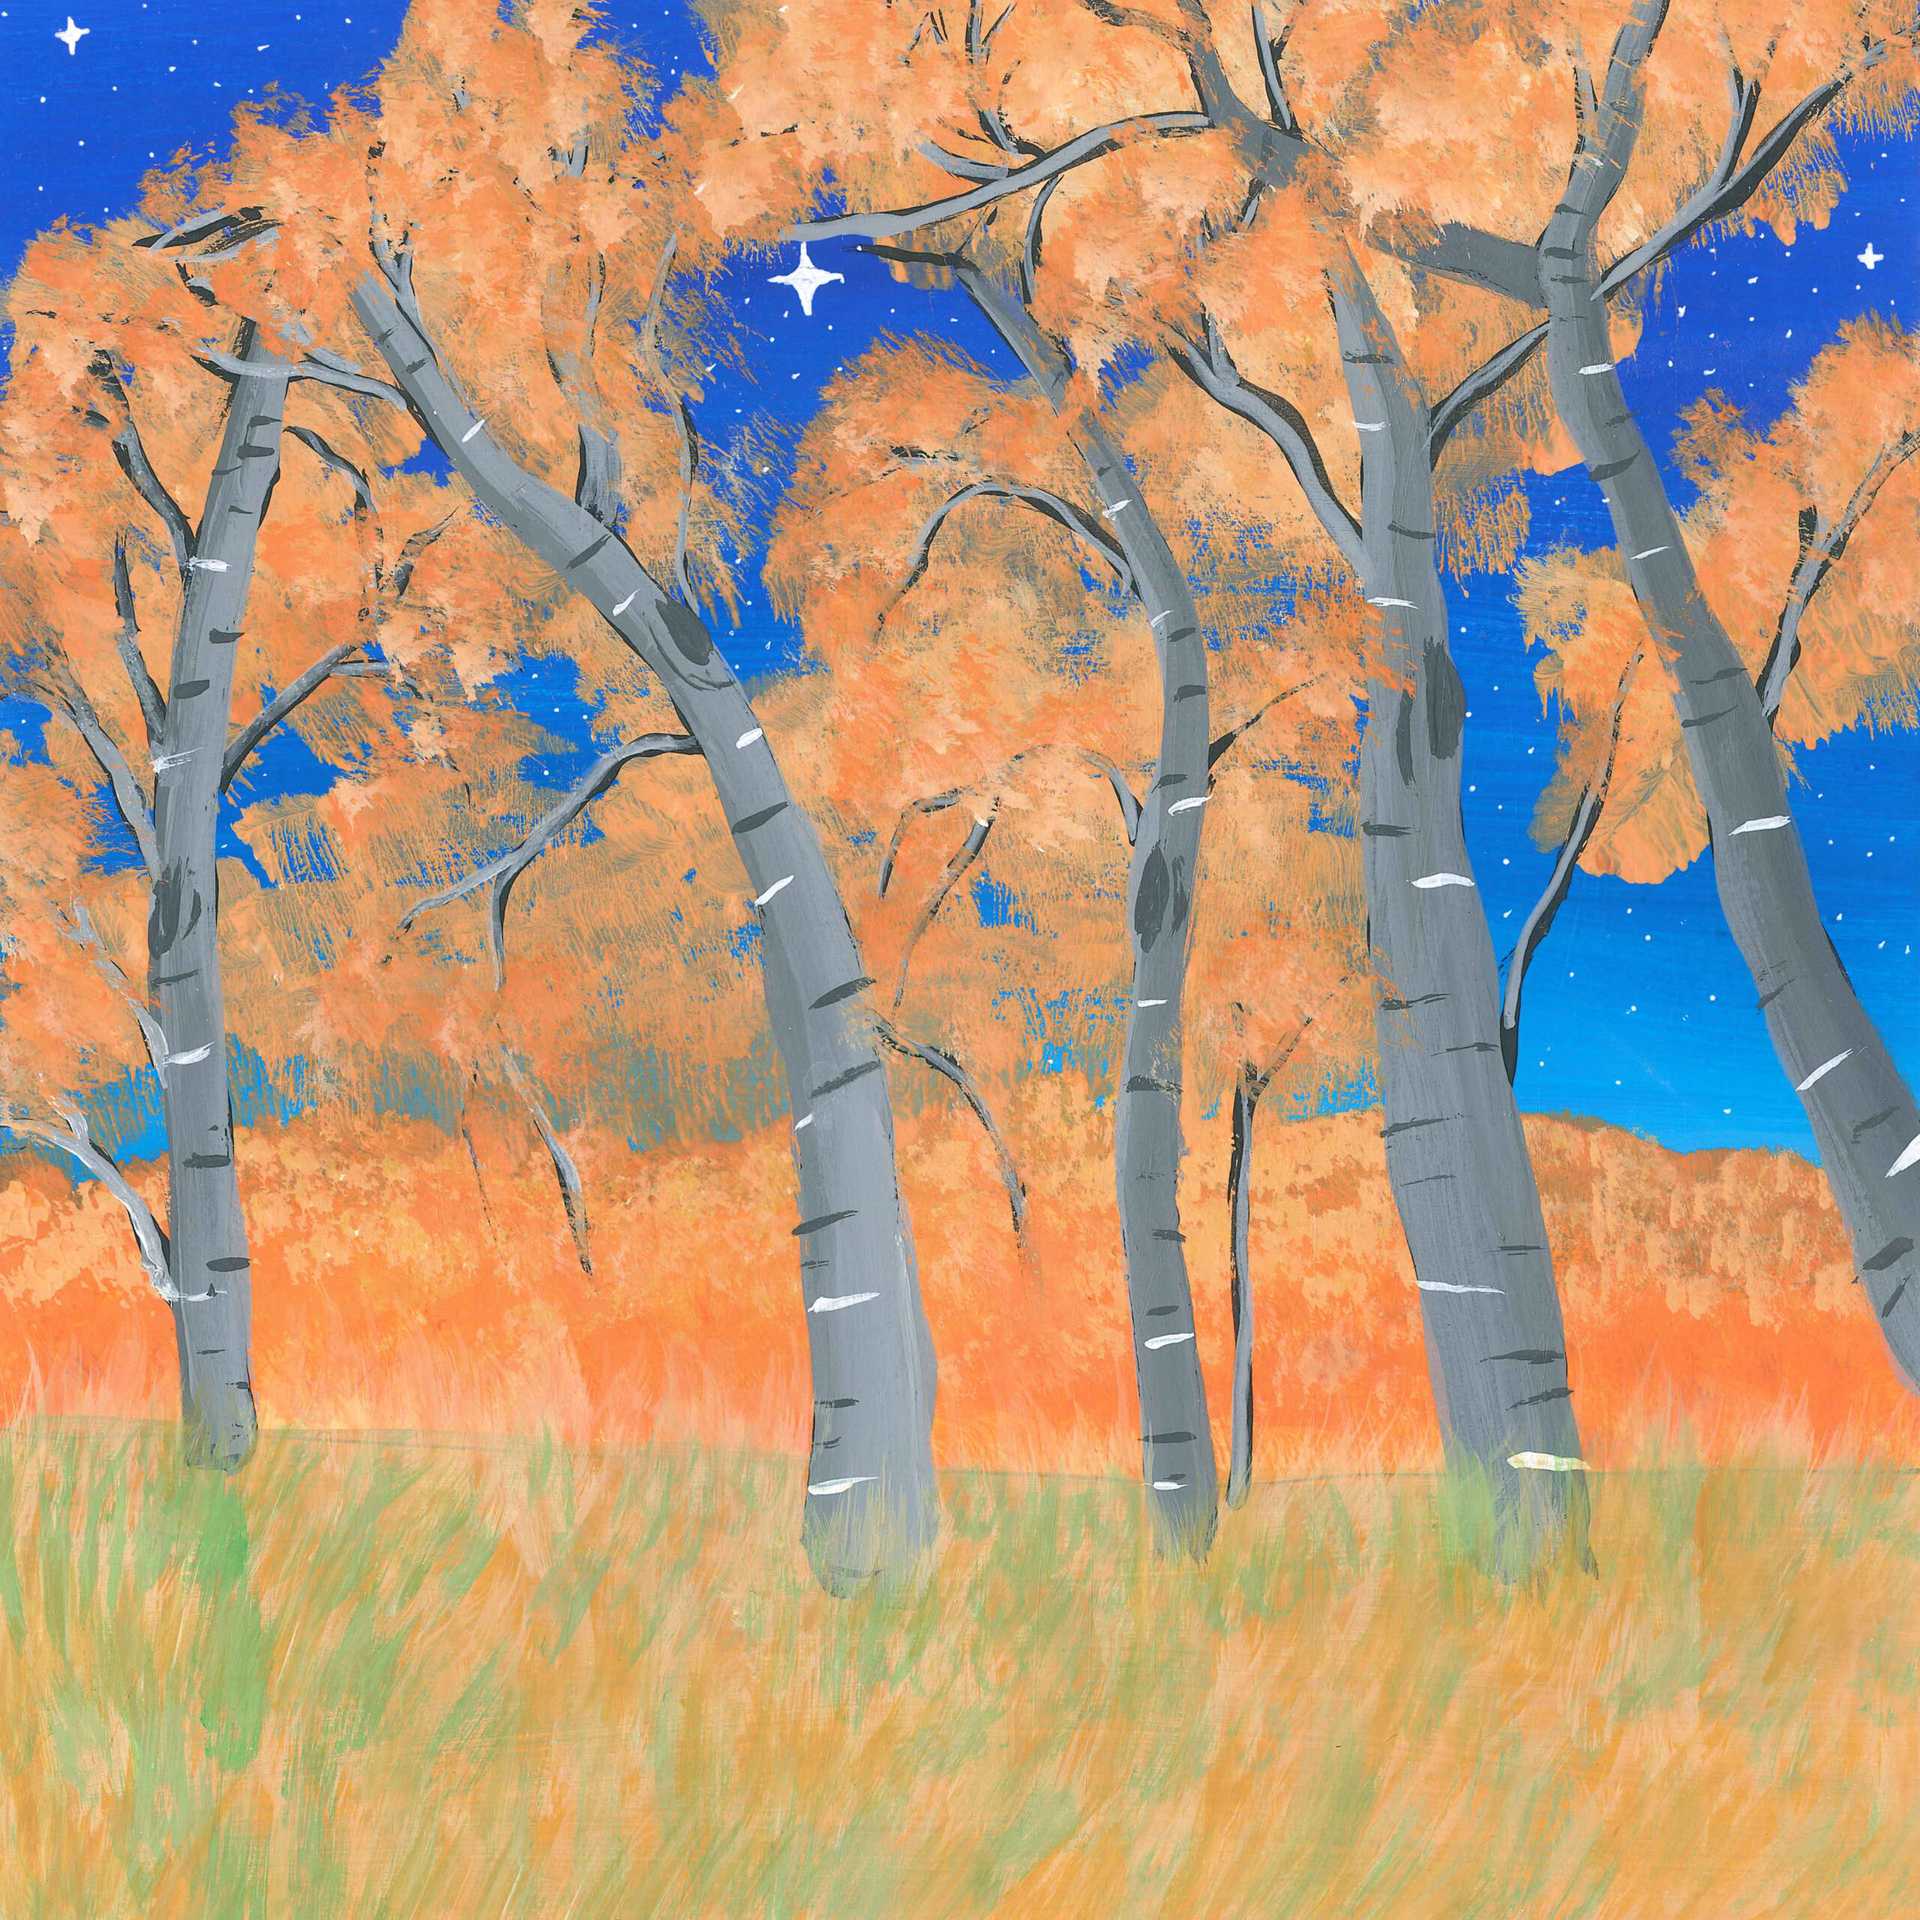 Wind Through Aspens In The Fall - nature landscape painting - earth.fm